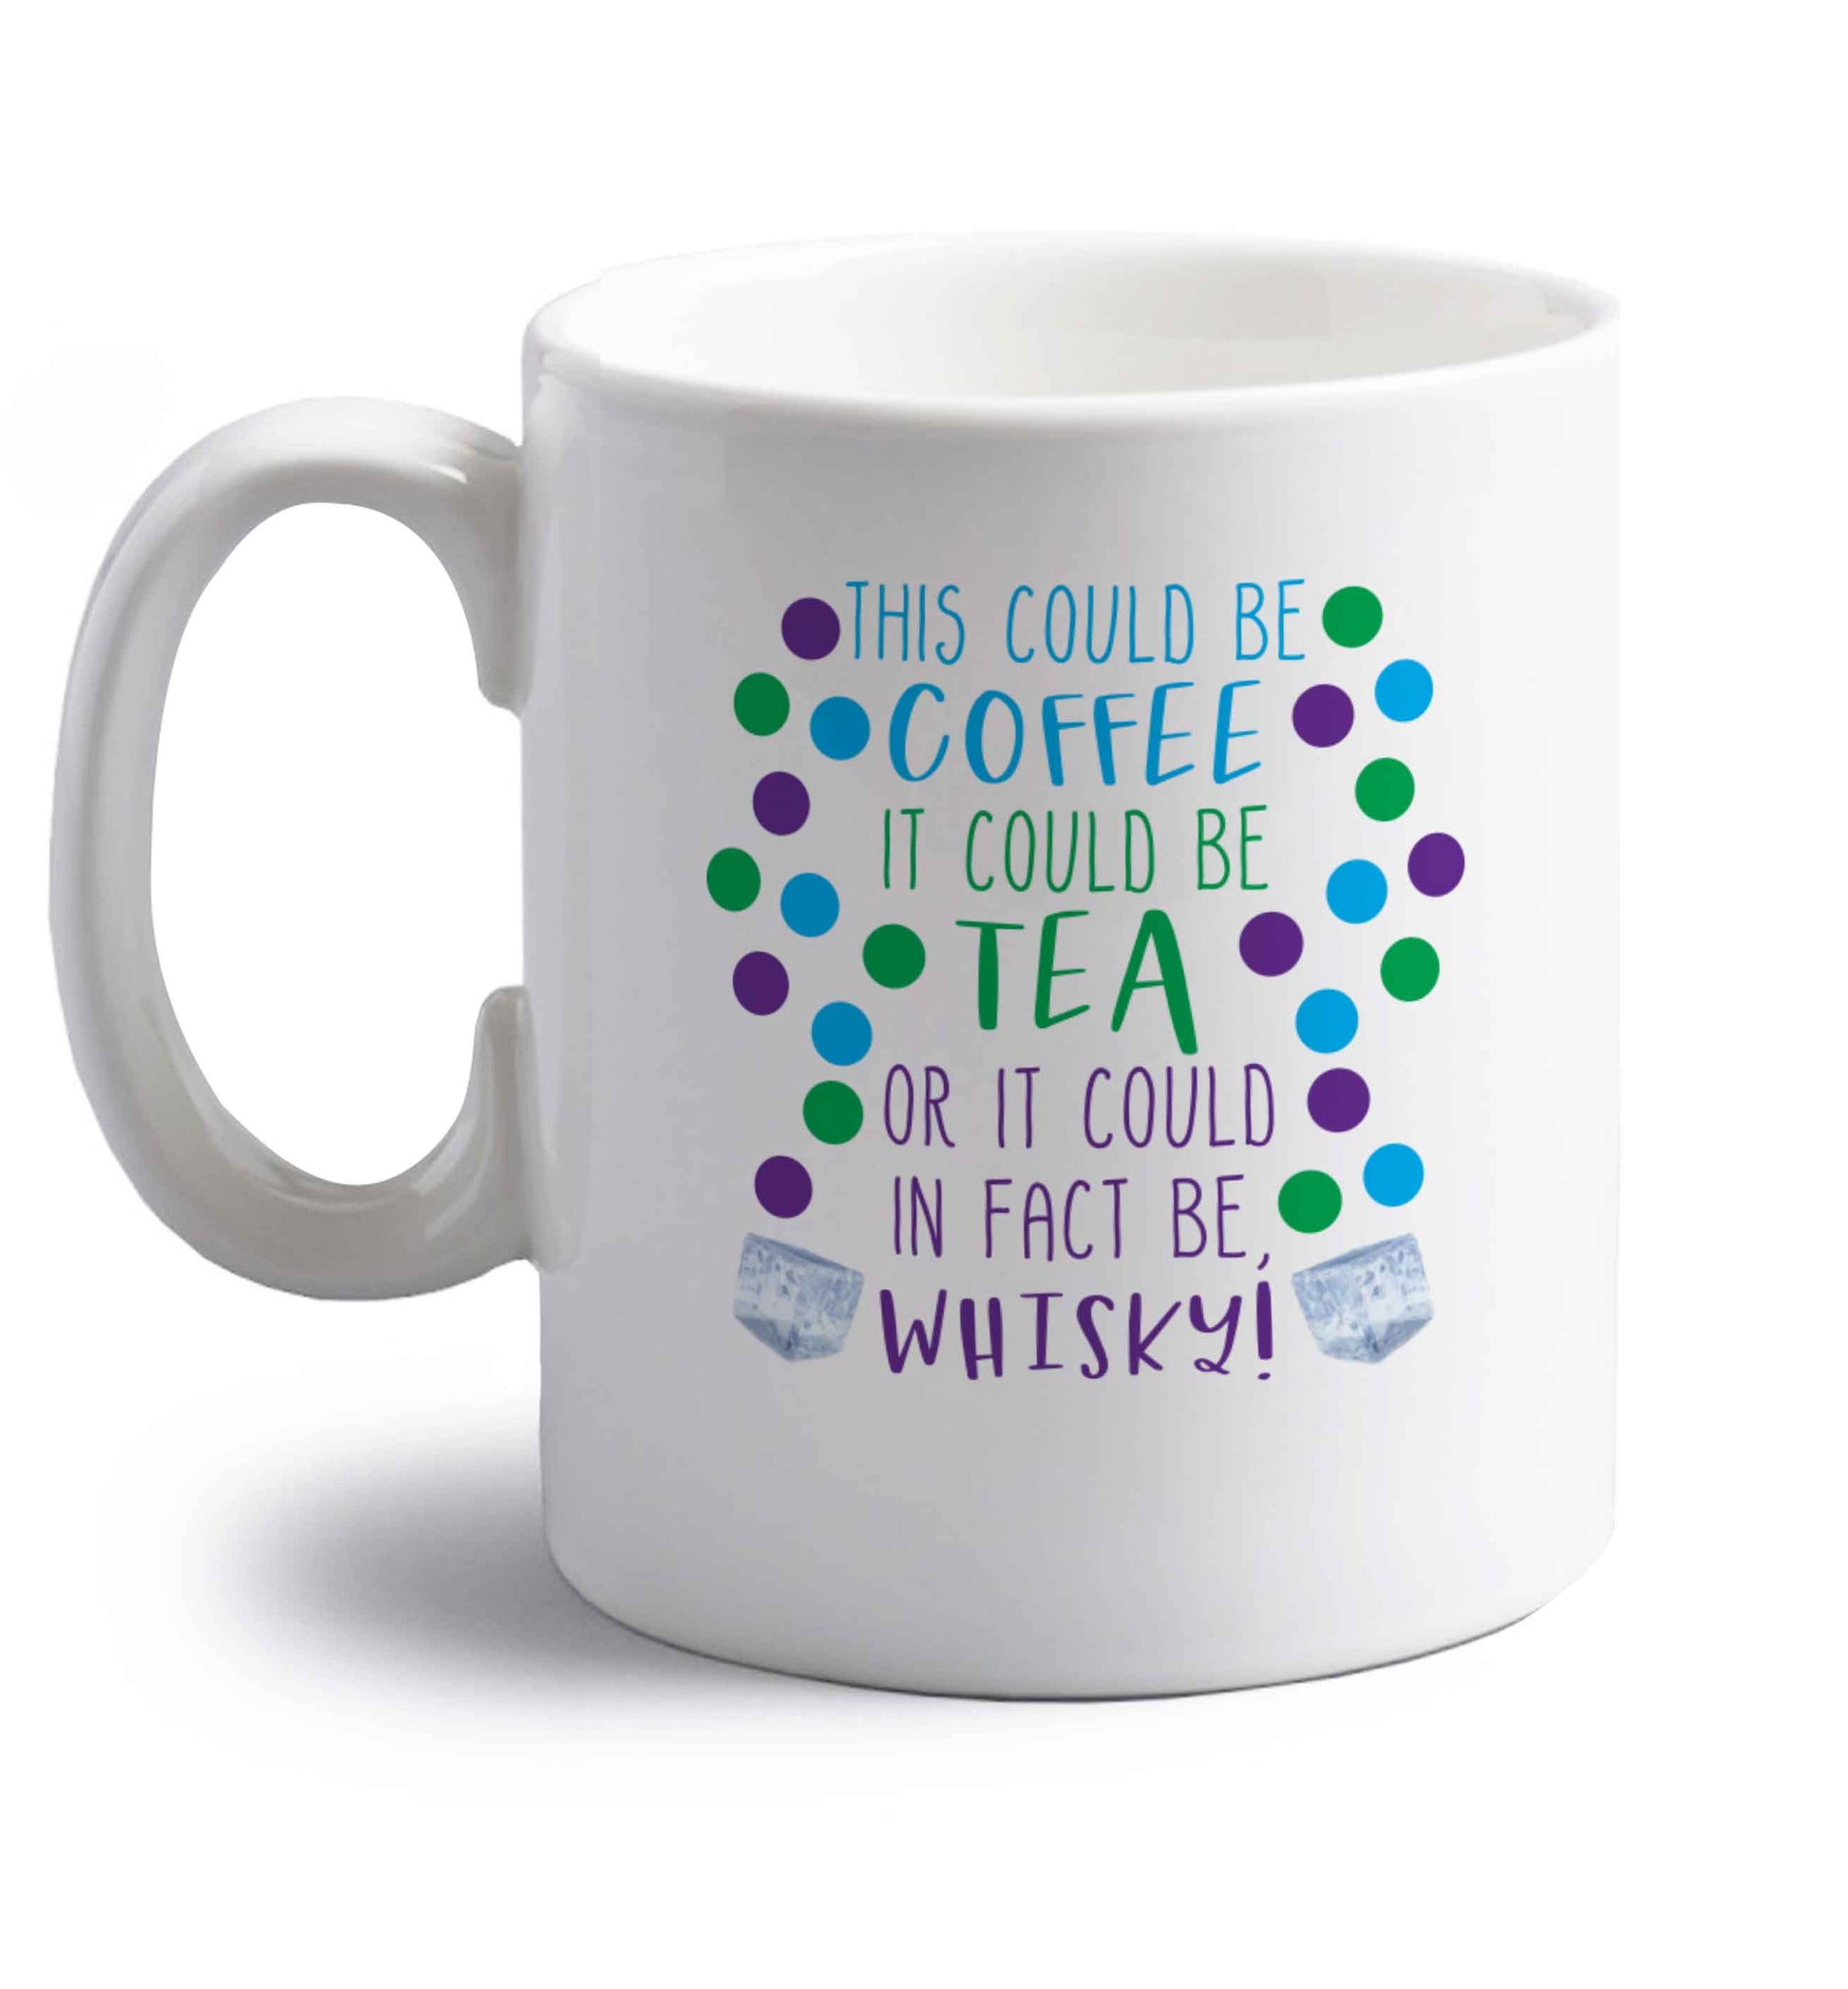 This could be tea, it could be coffee, or it could in fact be whisky right handed white ceramic mug 